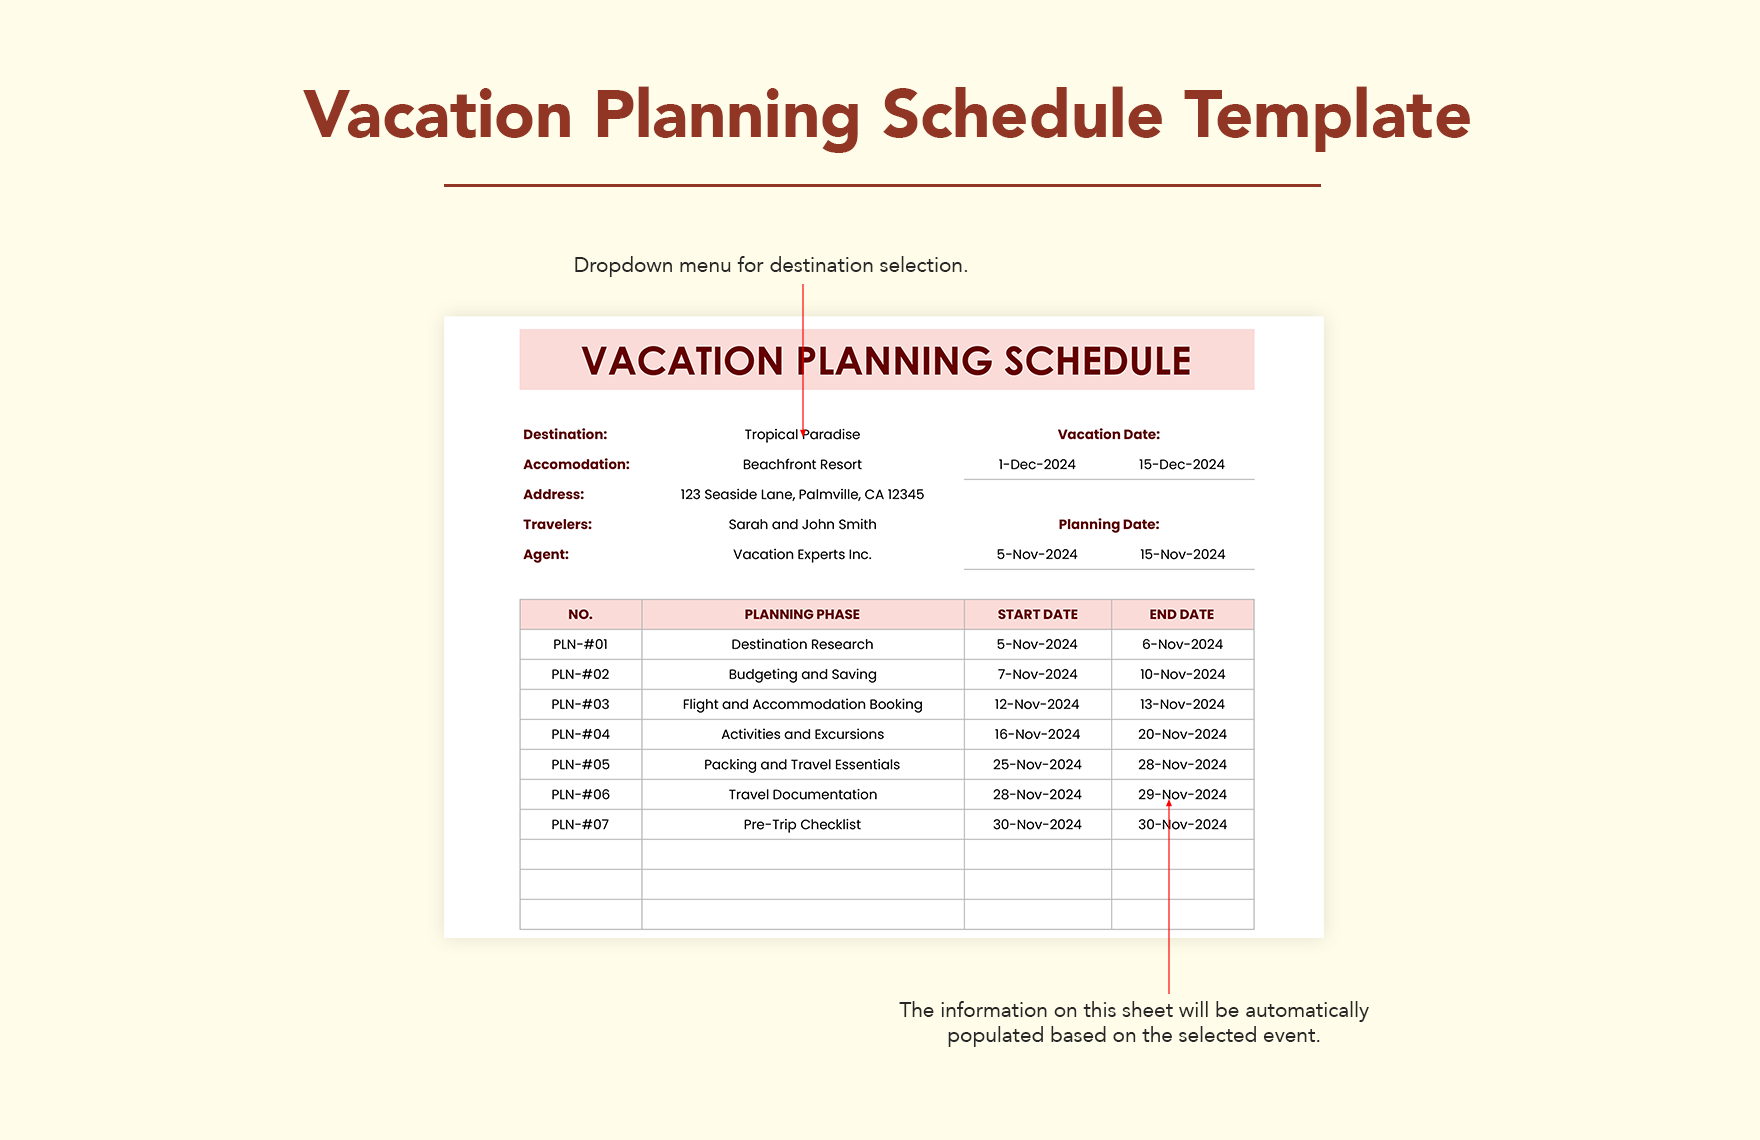 Vacation Planning Schedule Template